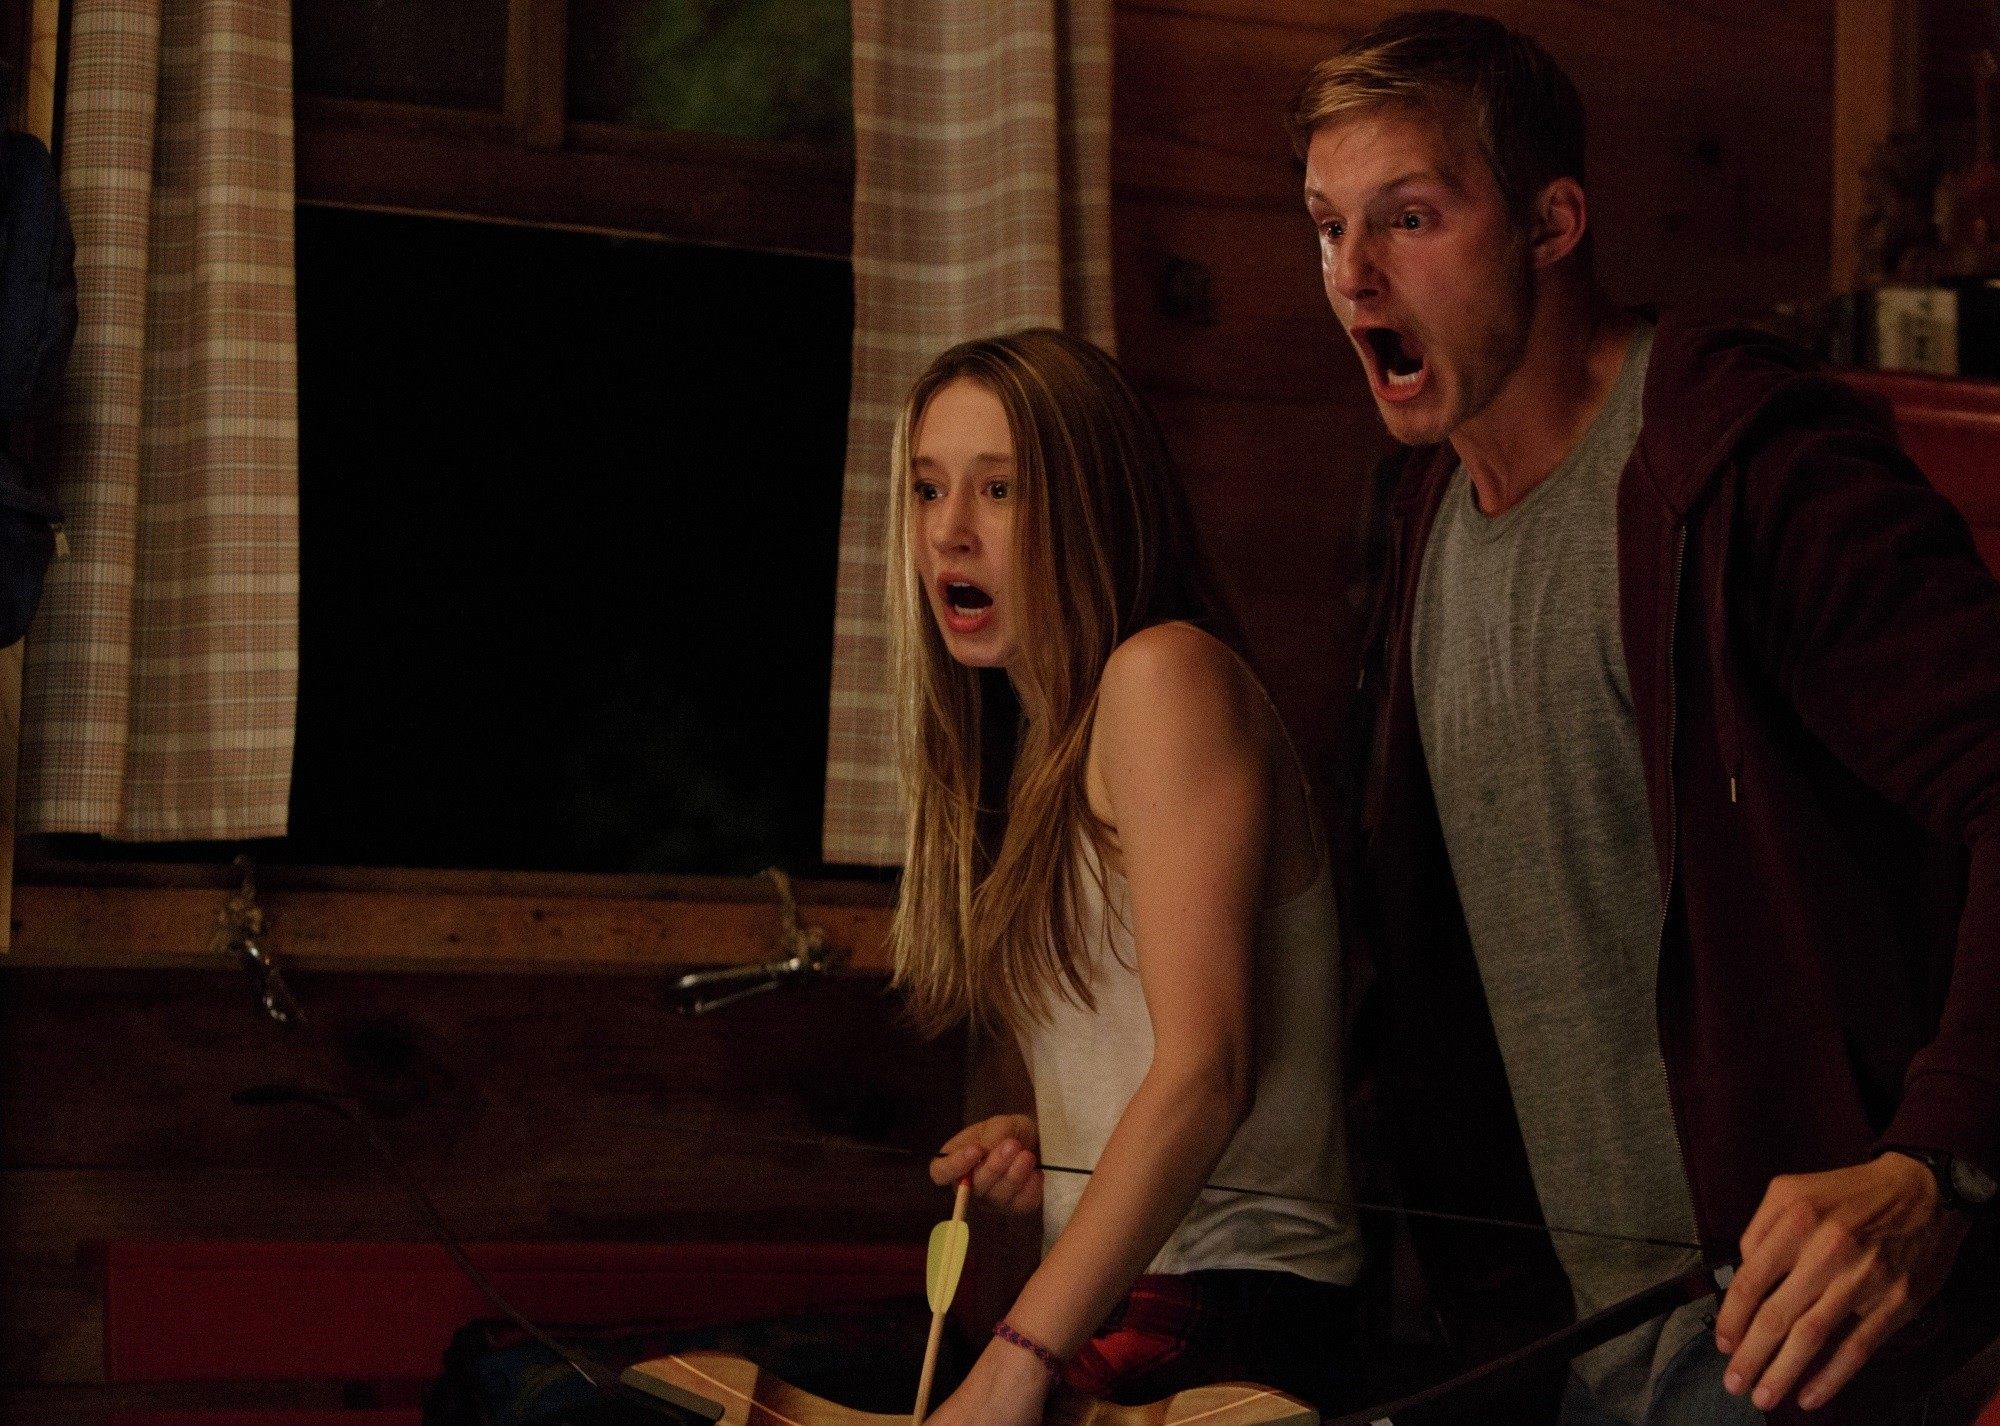 Taissa Farmiga stars as Max Cartwright and Alexander Ludwig stars as Chris in Stage 6 Films' The Final Girls (2015)